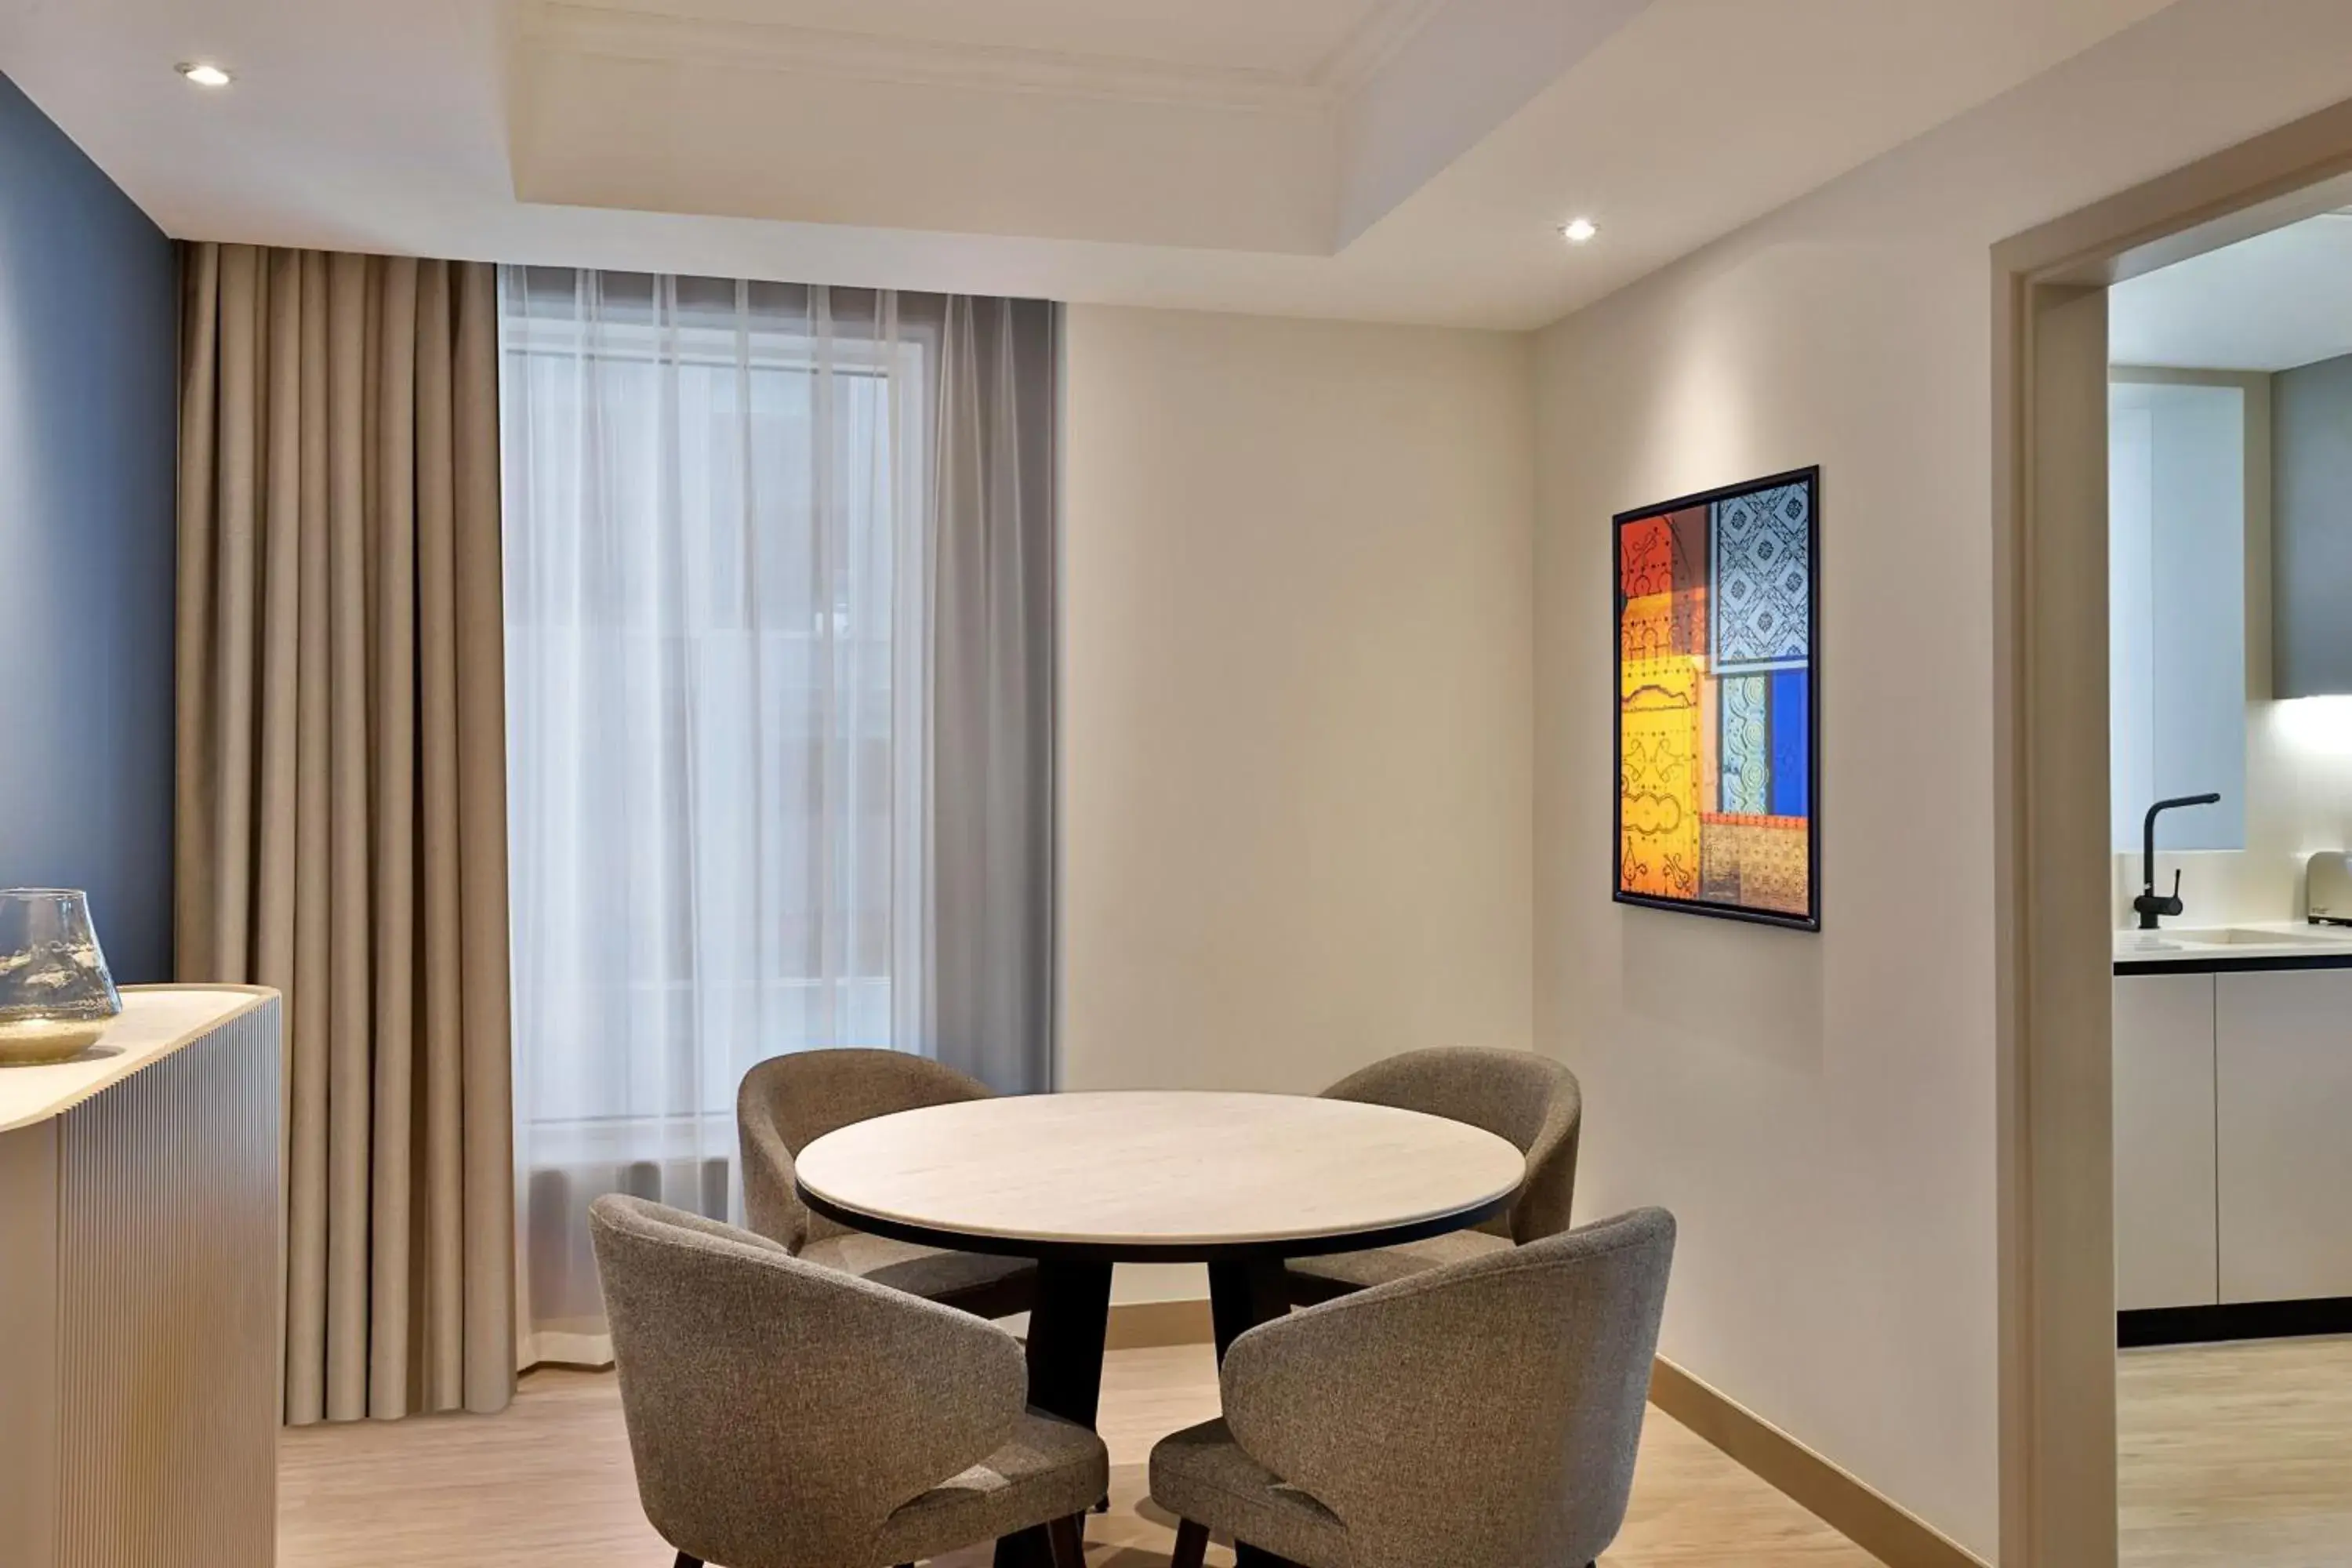 Bedroom, Dining Area in Residence Inn by Marriott Sheikh Zayed Road, Dubai